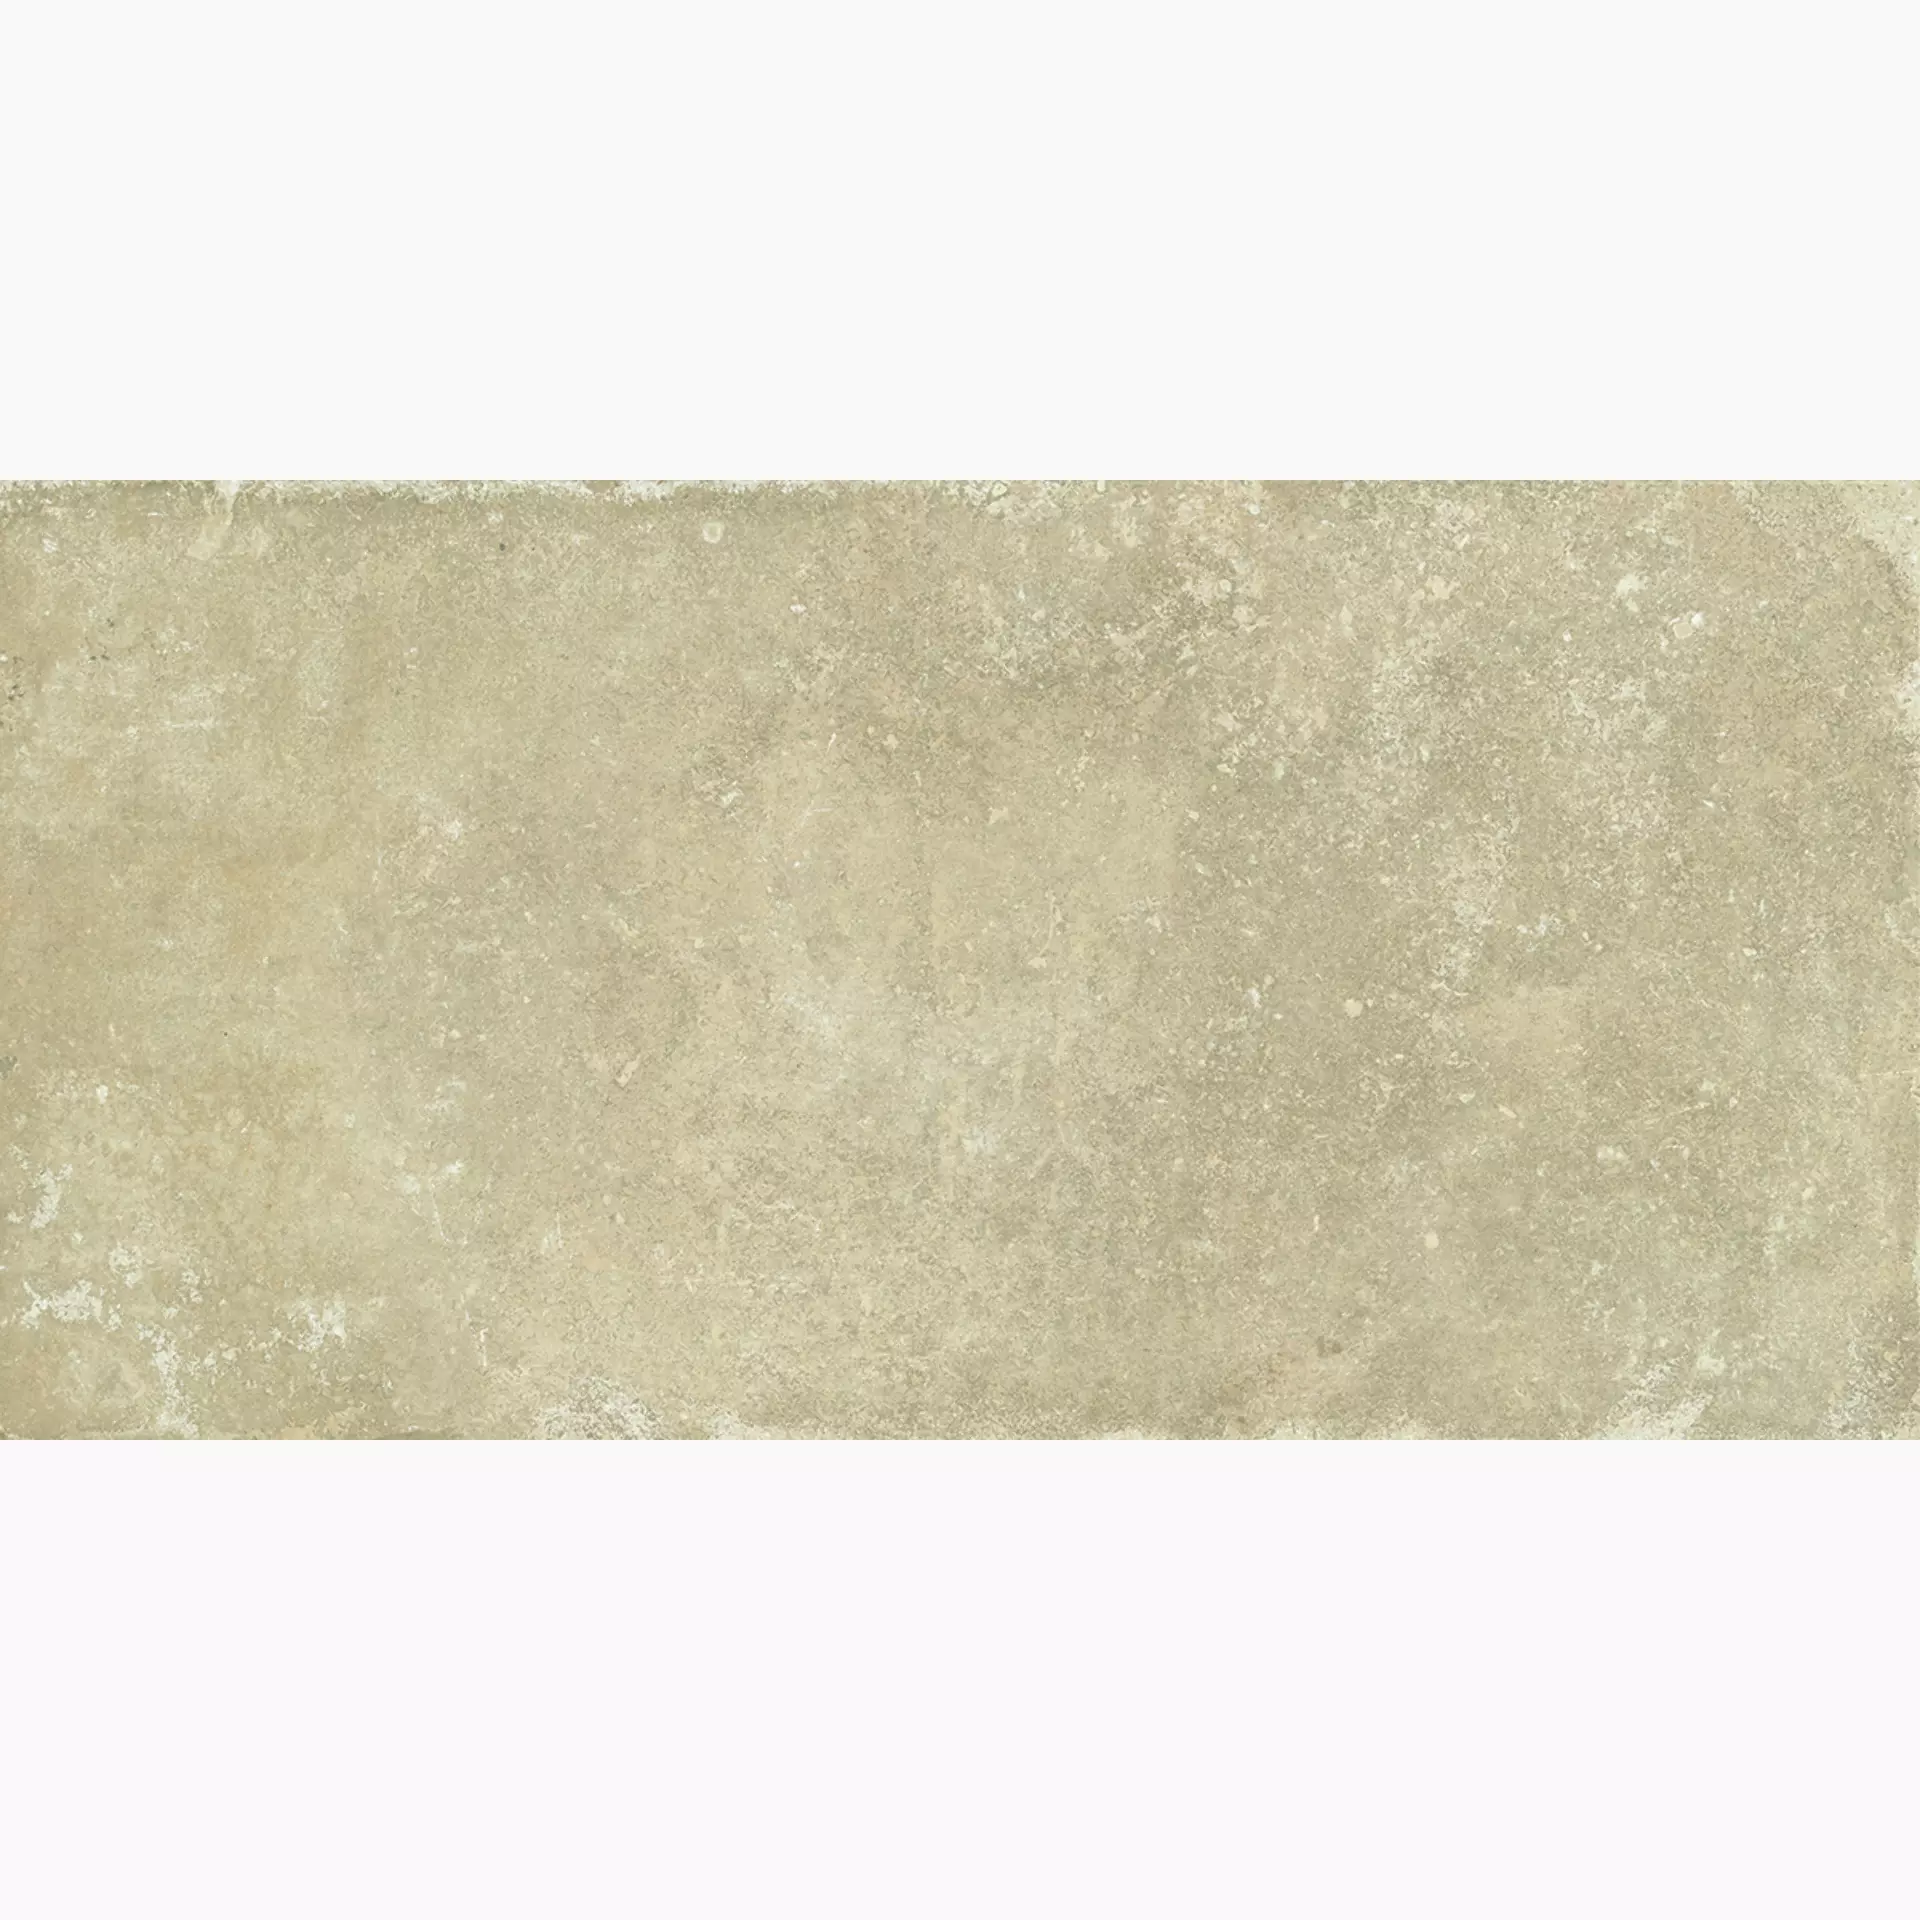 Alfalux Cottage Taupe Silk 8290139 60x120cm rectified 9mm